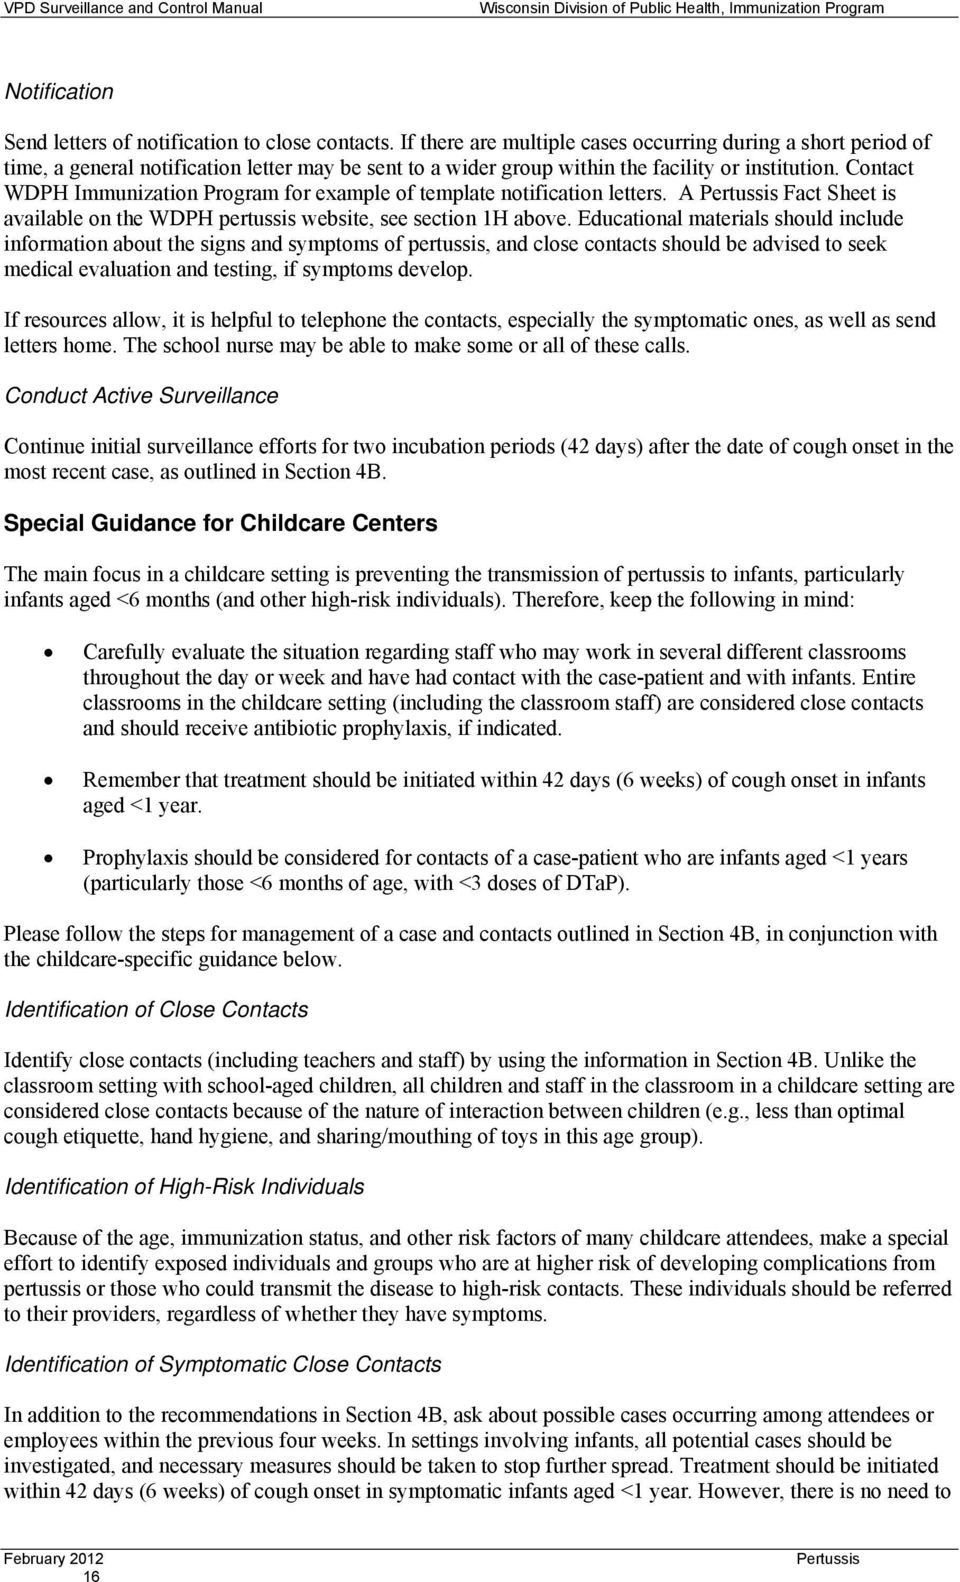 Contact WDPH Immunization Program for example of template notification letters. A Fact Sheet is available on the WDPH pertussis website, see section 1H above.